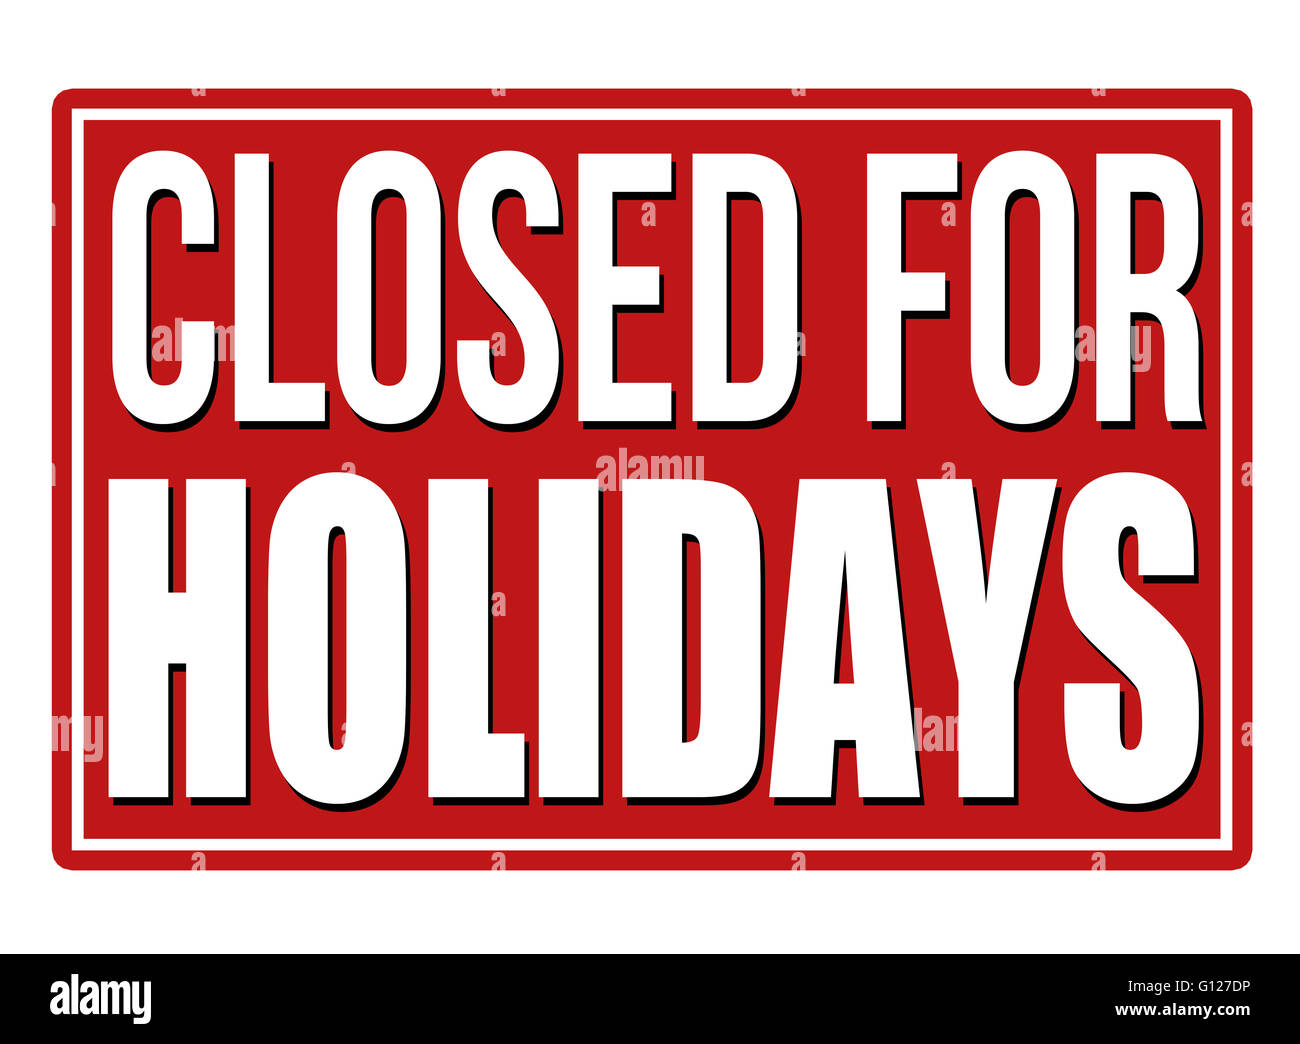 Closed for holidays design template on white background, vector illustration Stock Photo